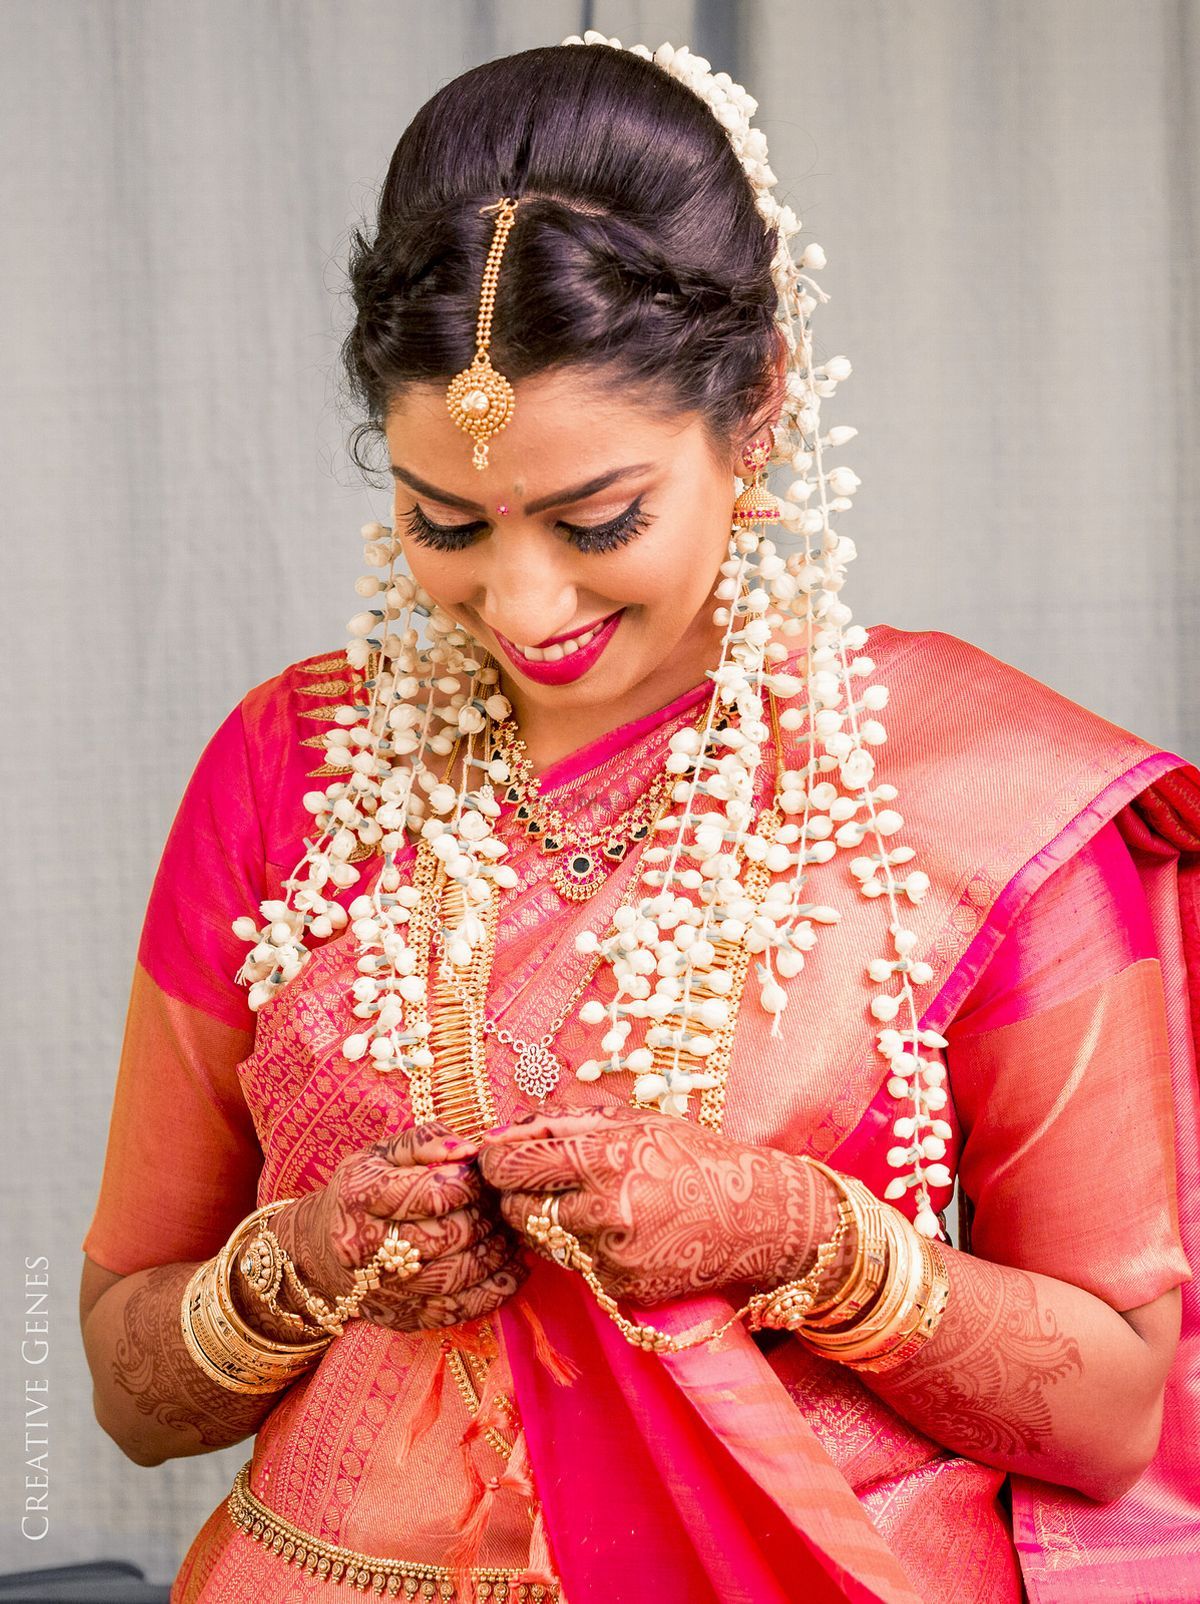 30+ Creative And Modern Ways To Style The Traditional Gajra On Your